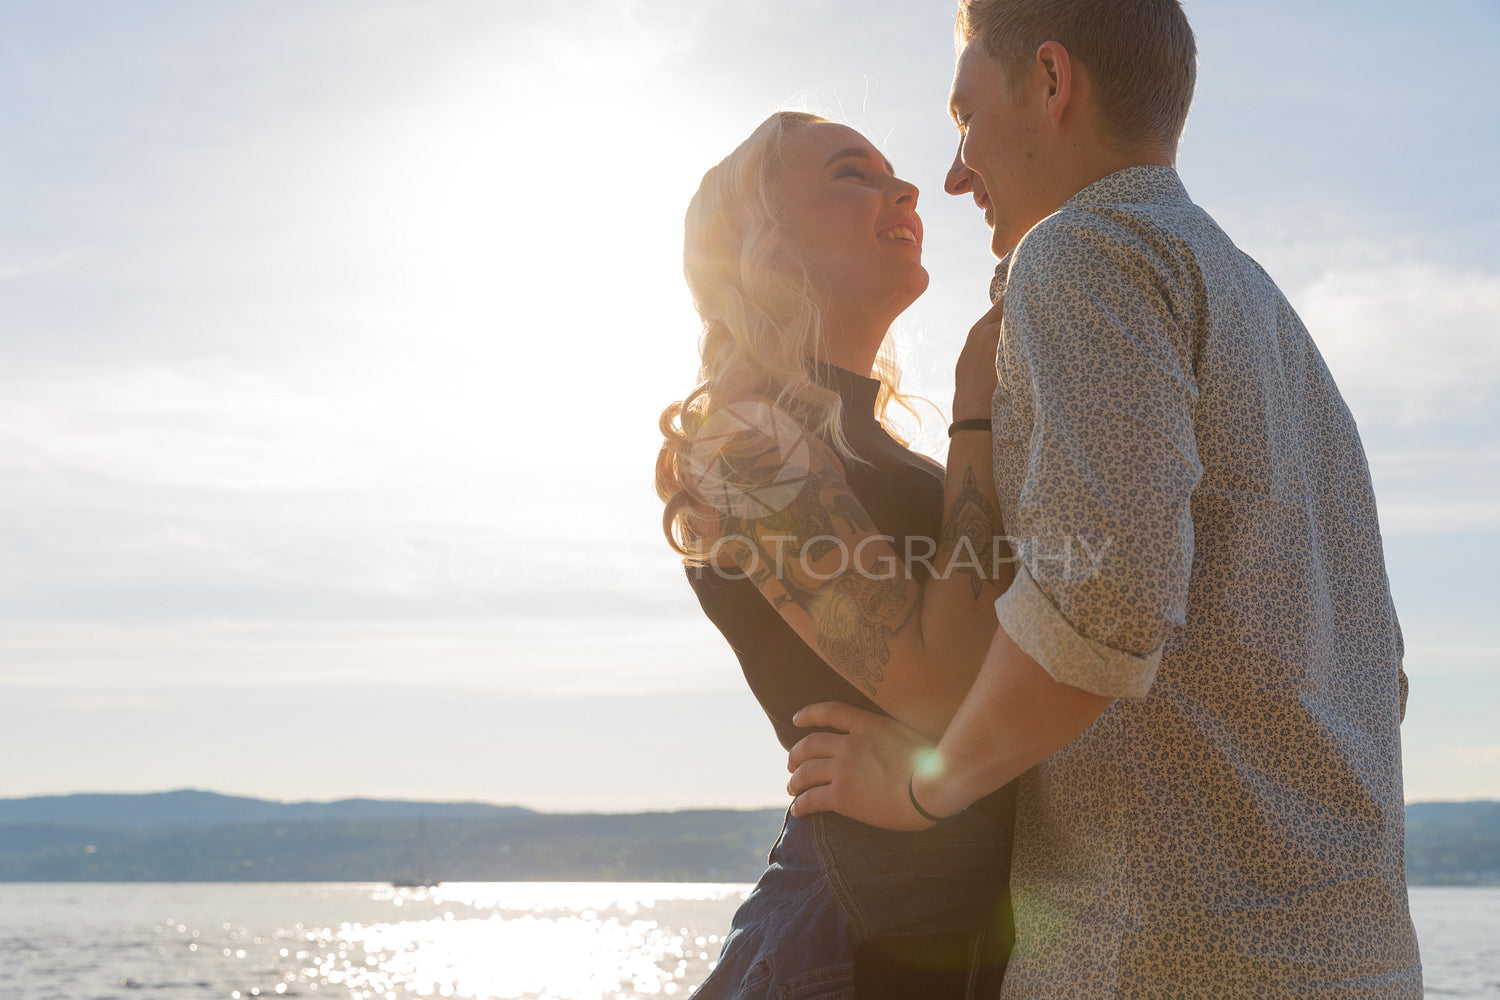 Smiling couple in romantic embrace on beach at summer